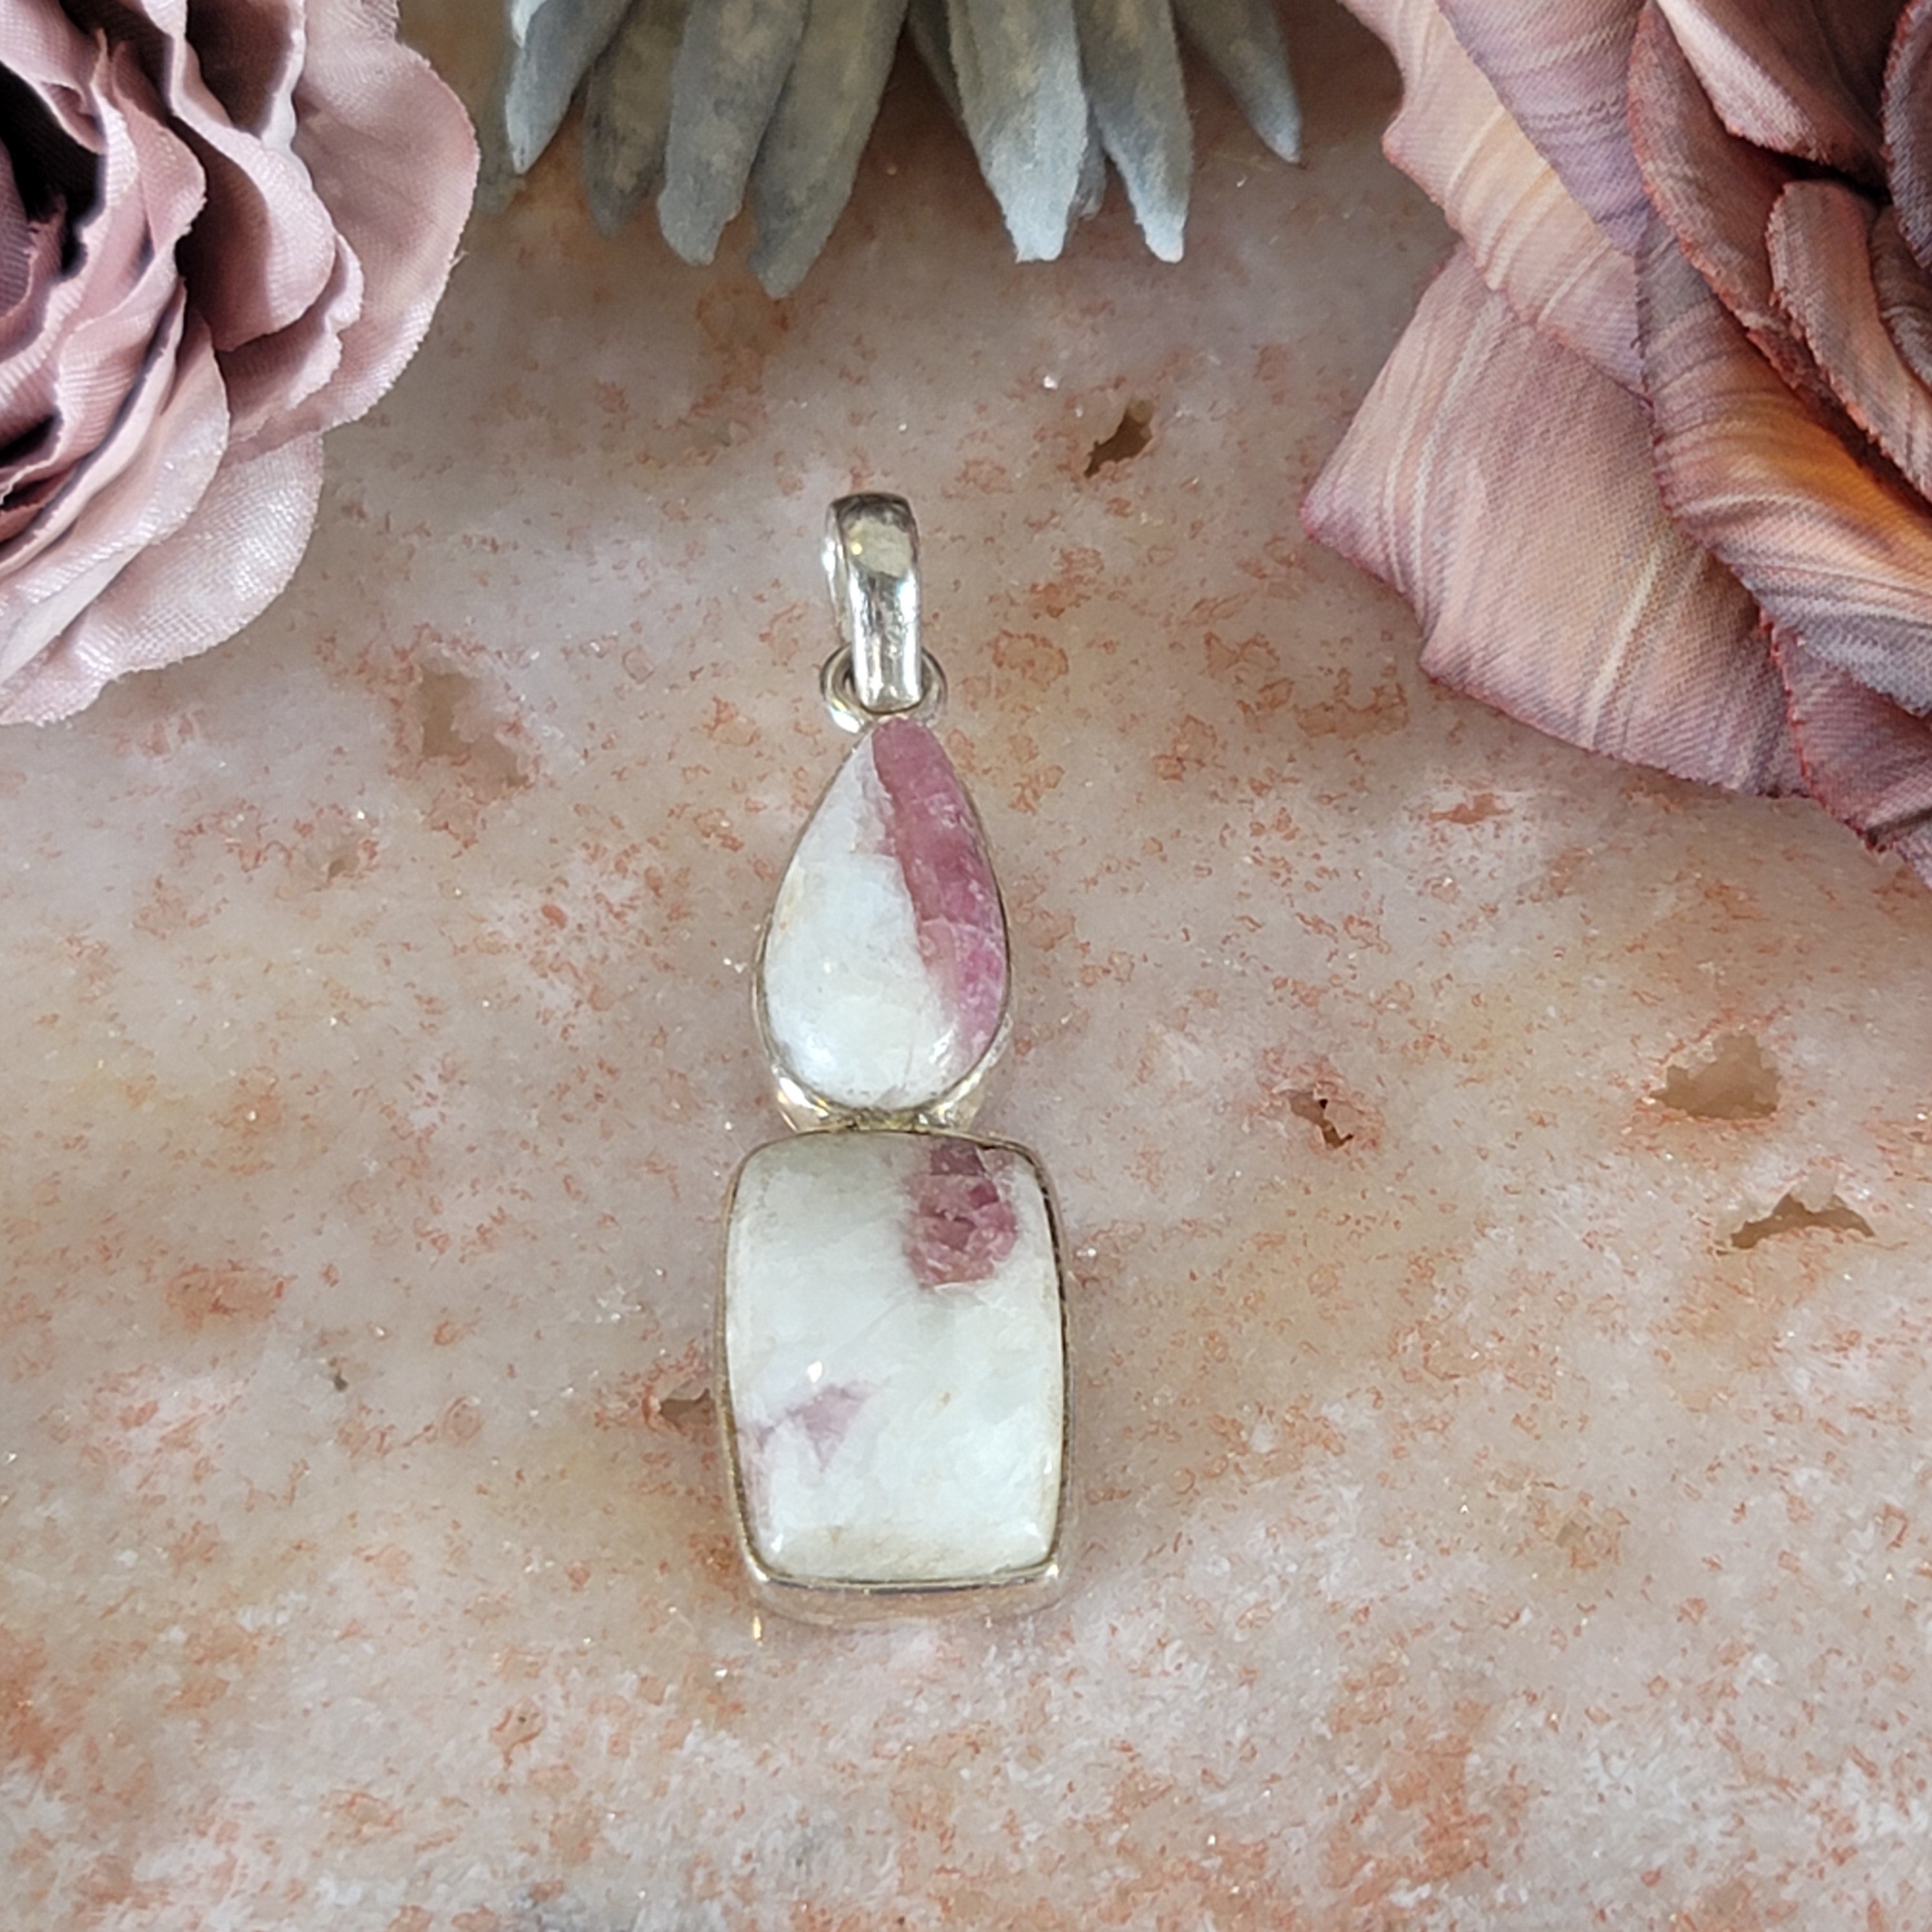 Pink Tourmaline in Quartz Pendant .925 Silver for Emotional Healing, Joy and Love